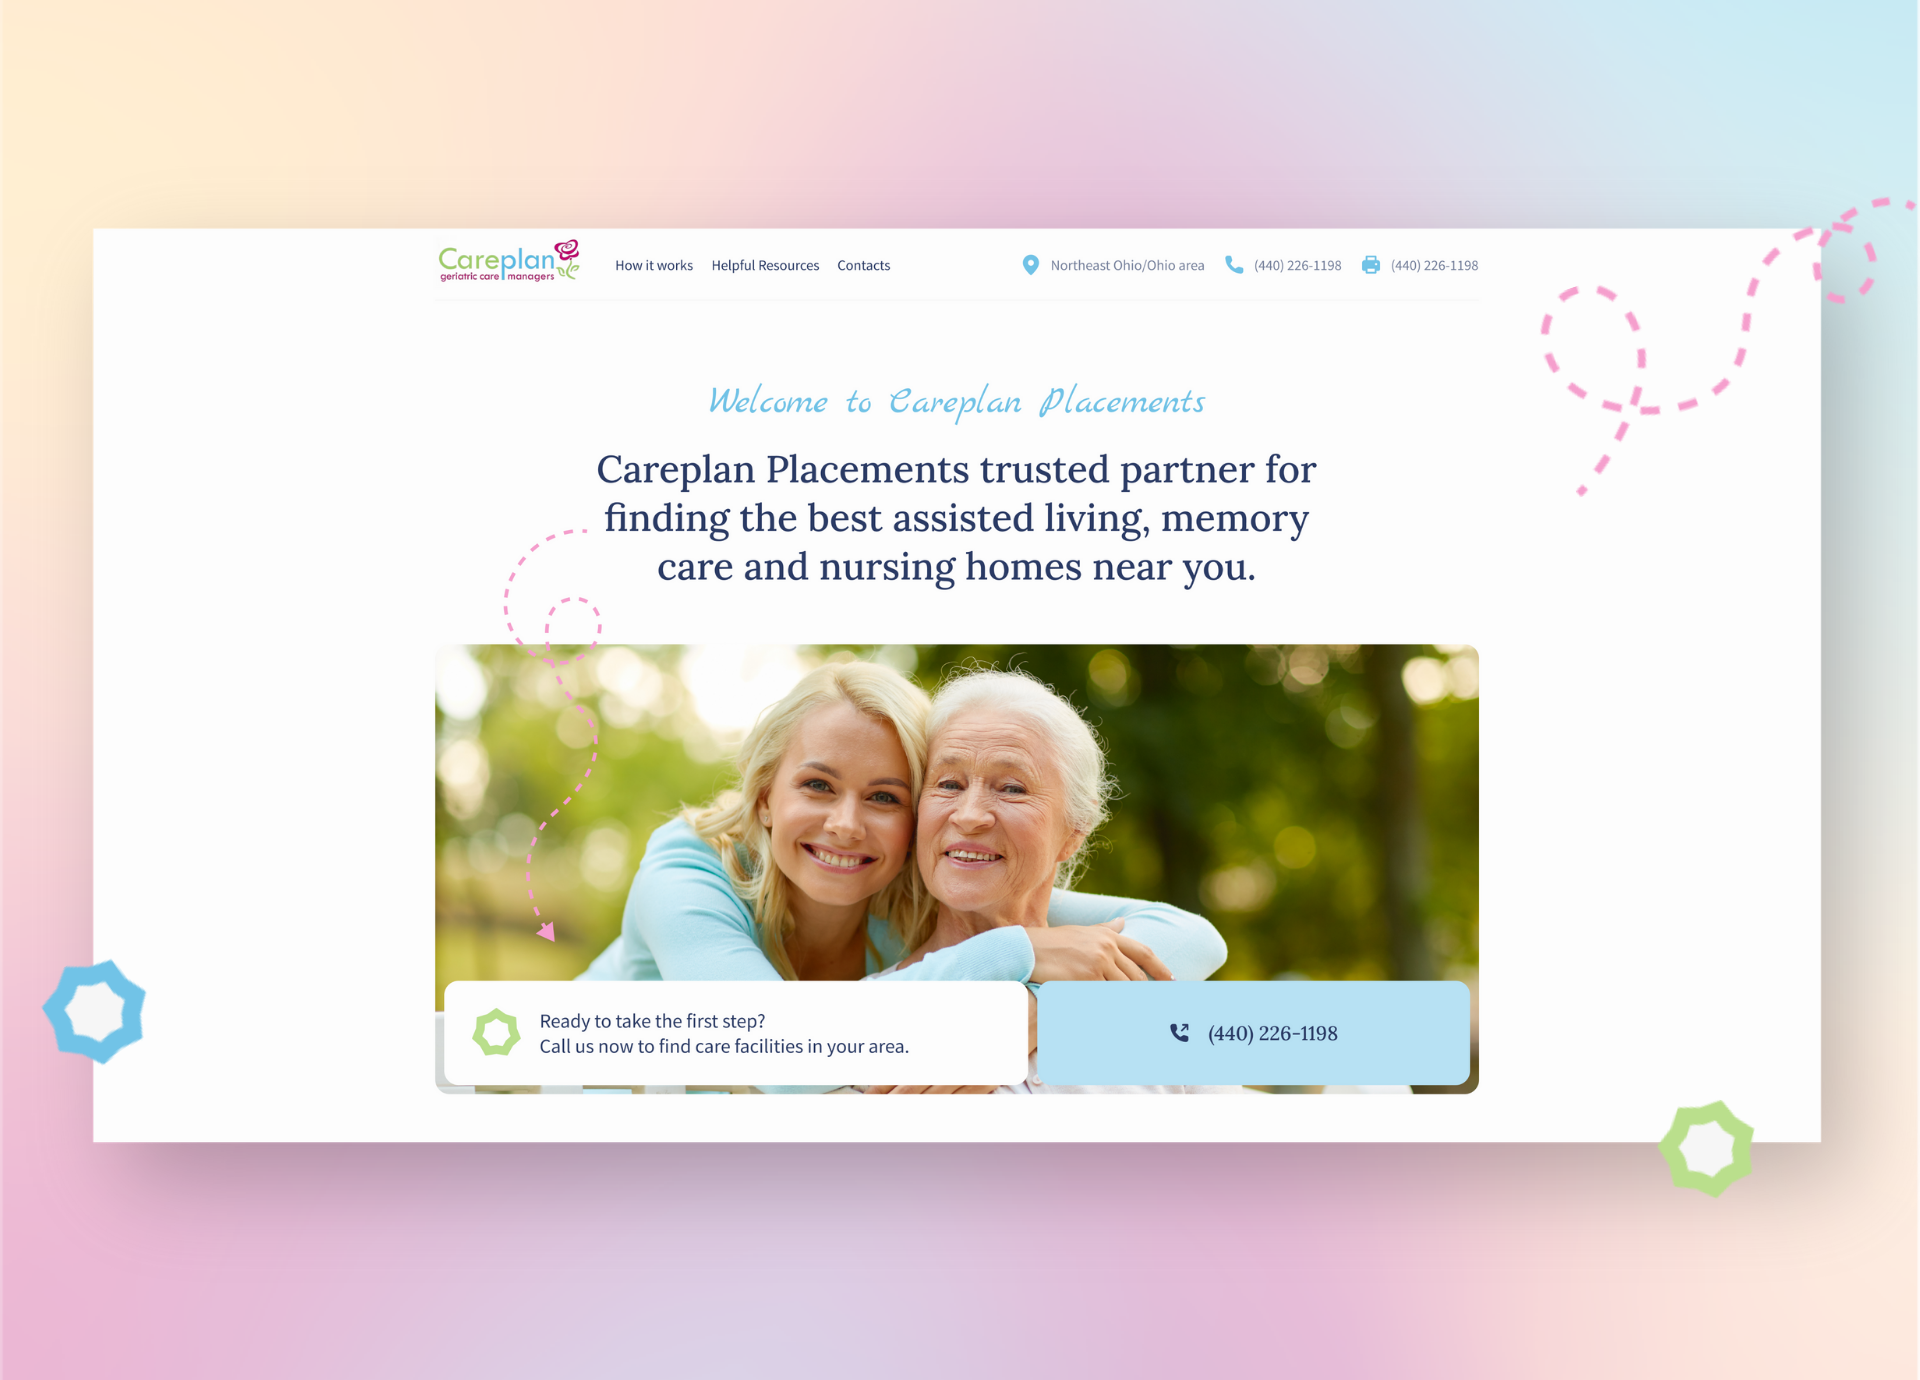 Care Plan Placements